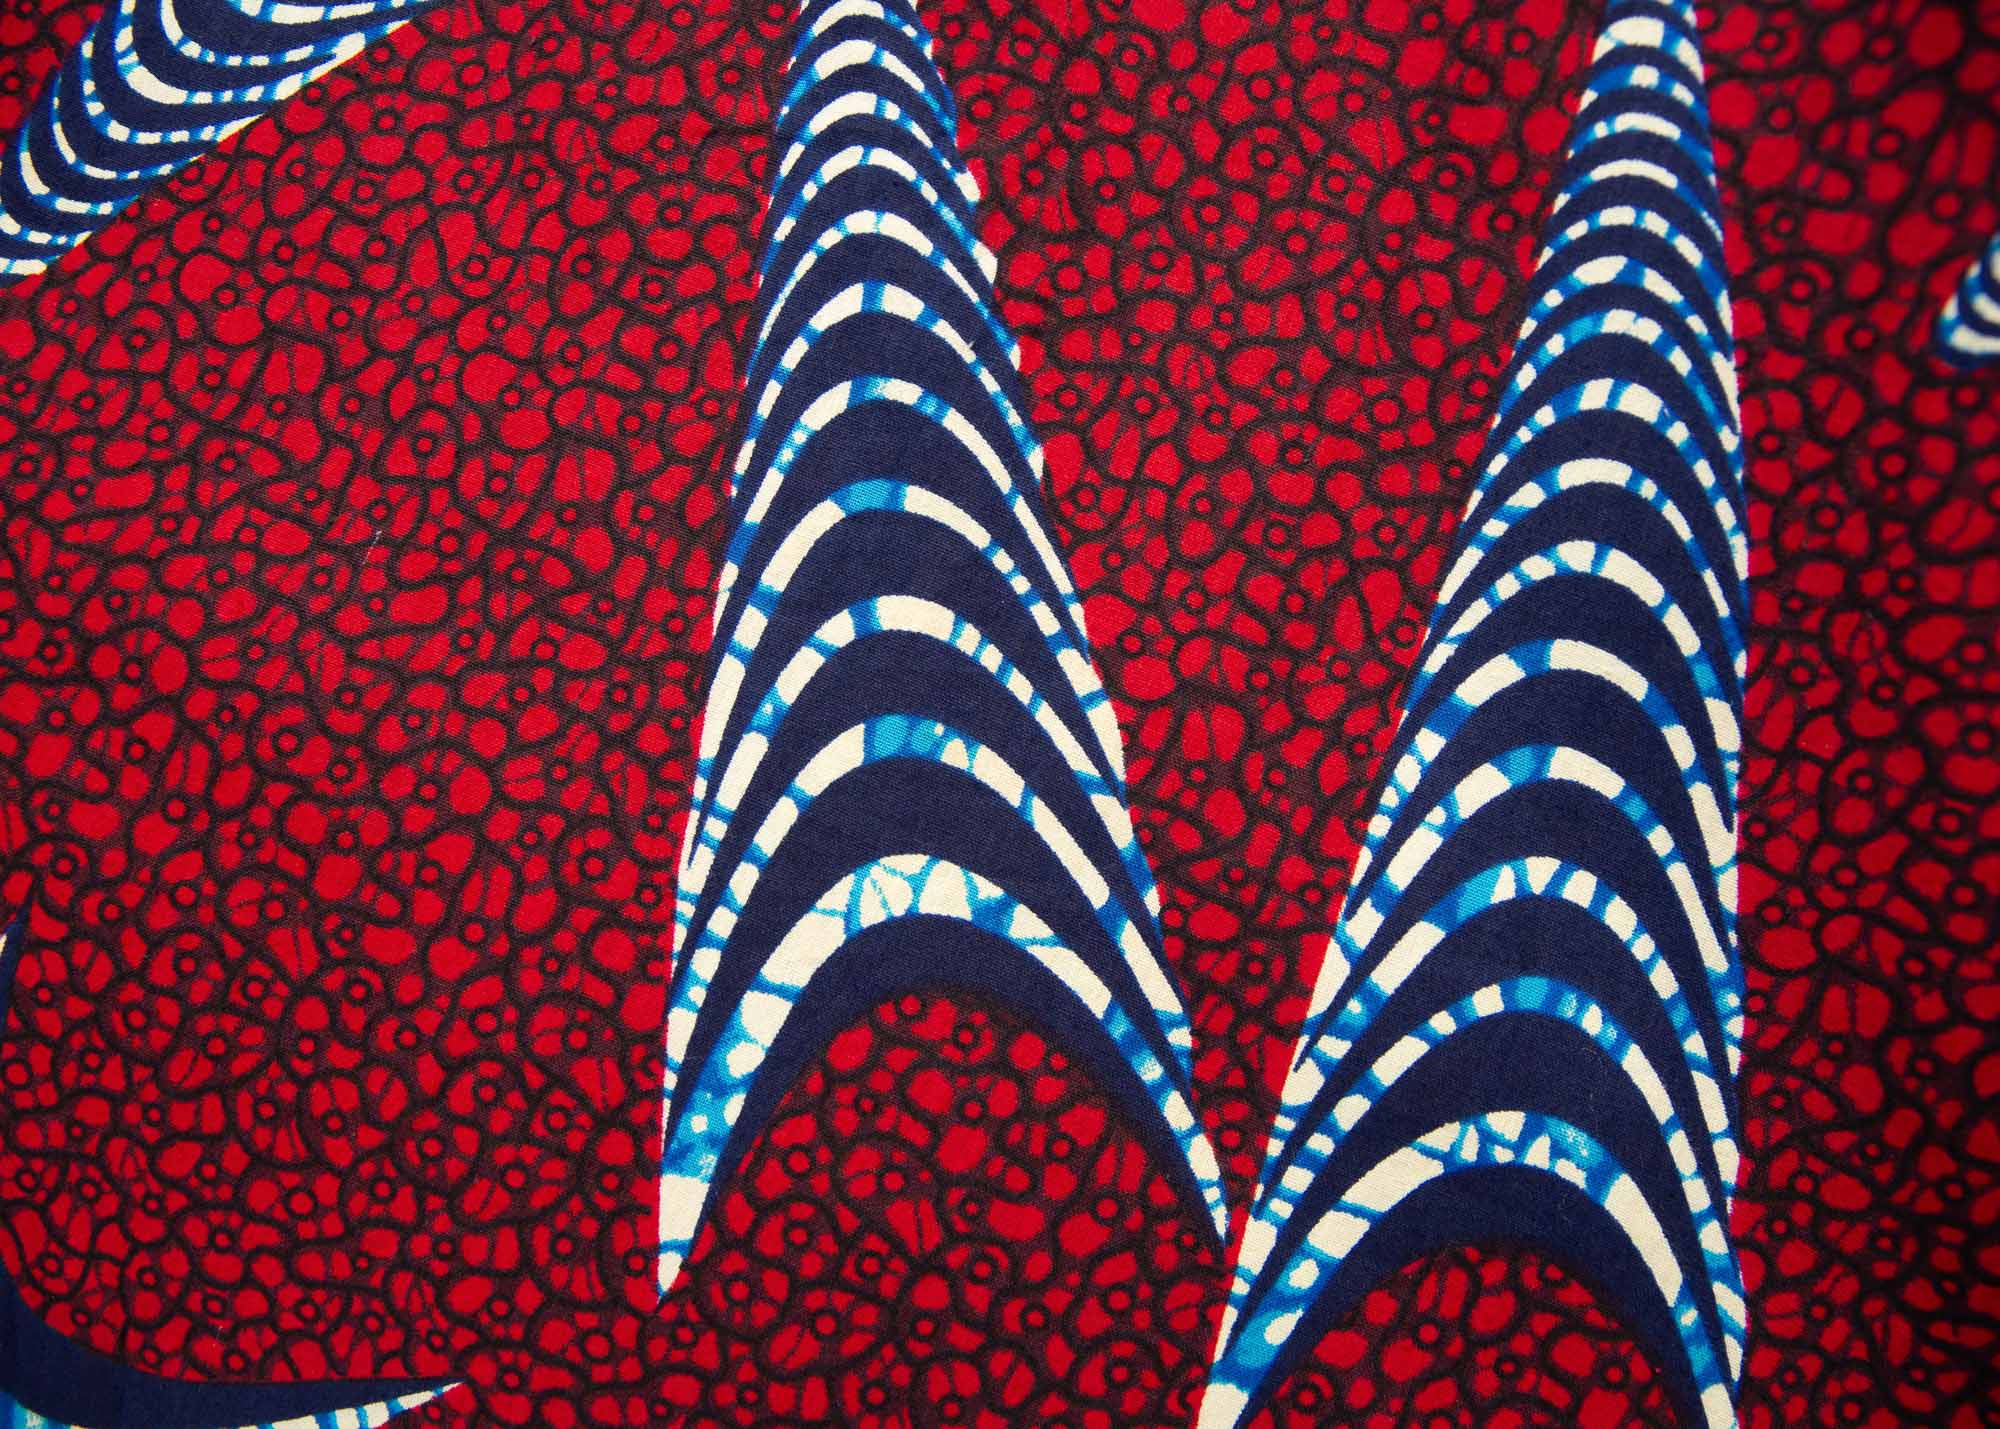 Close up display of red and black dress with navy blue and beige print